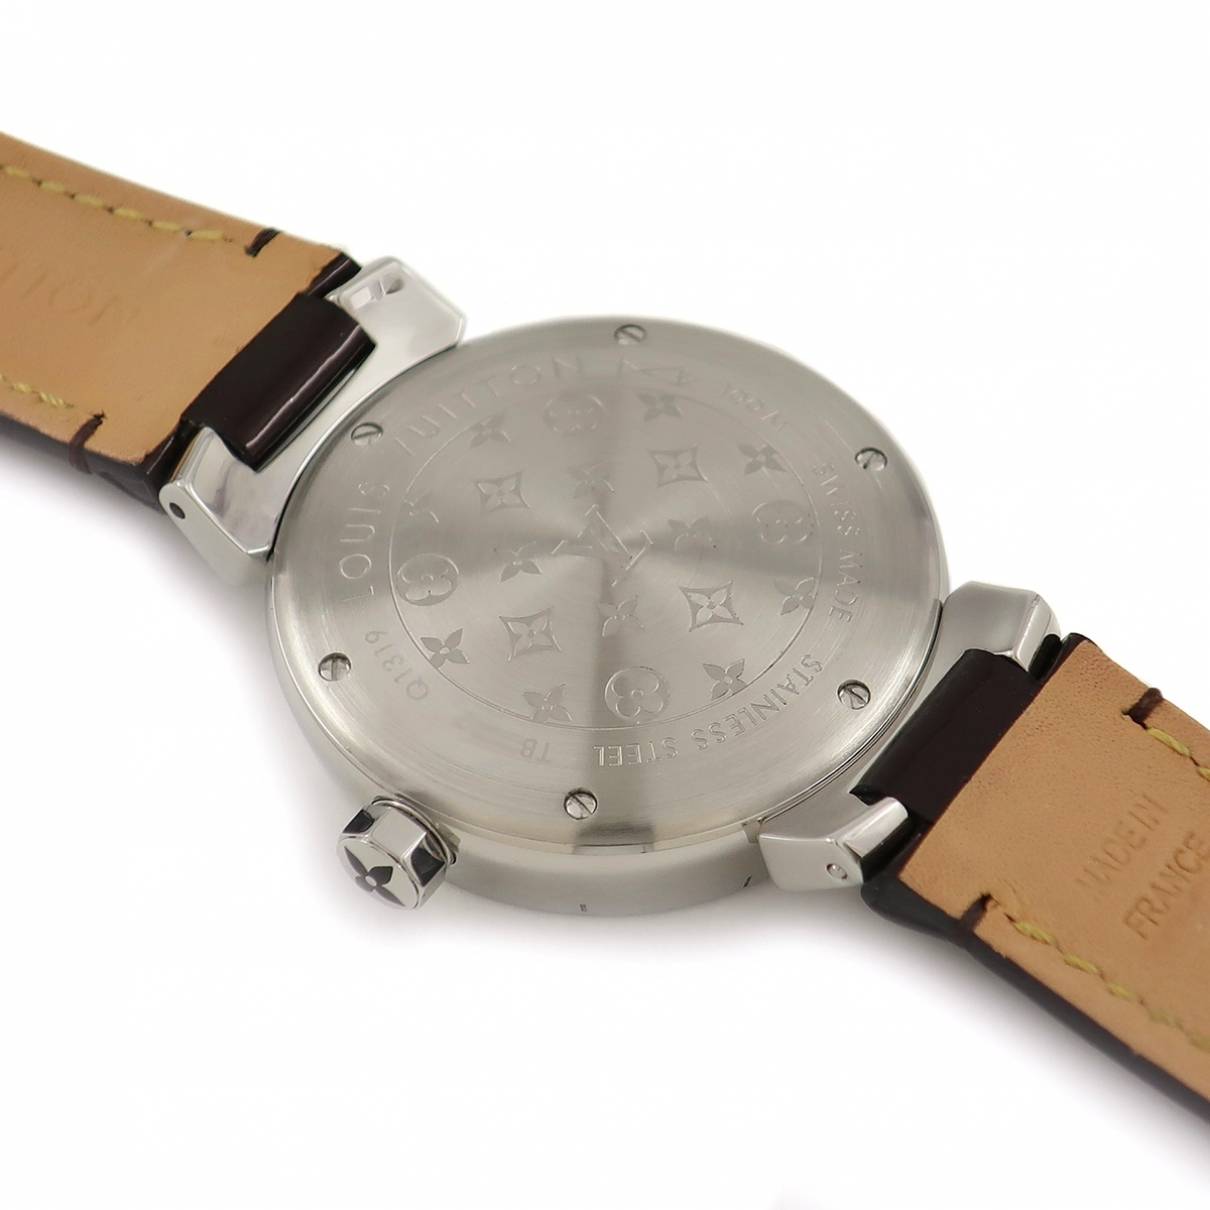 Louis Vuitton Tambour Monogram – QBB167 – 6,360 USD – The Watch Pages